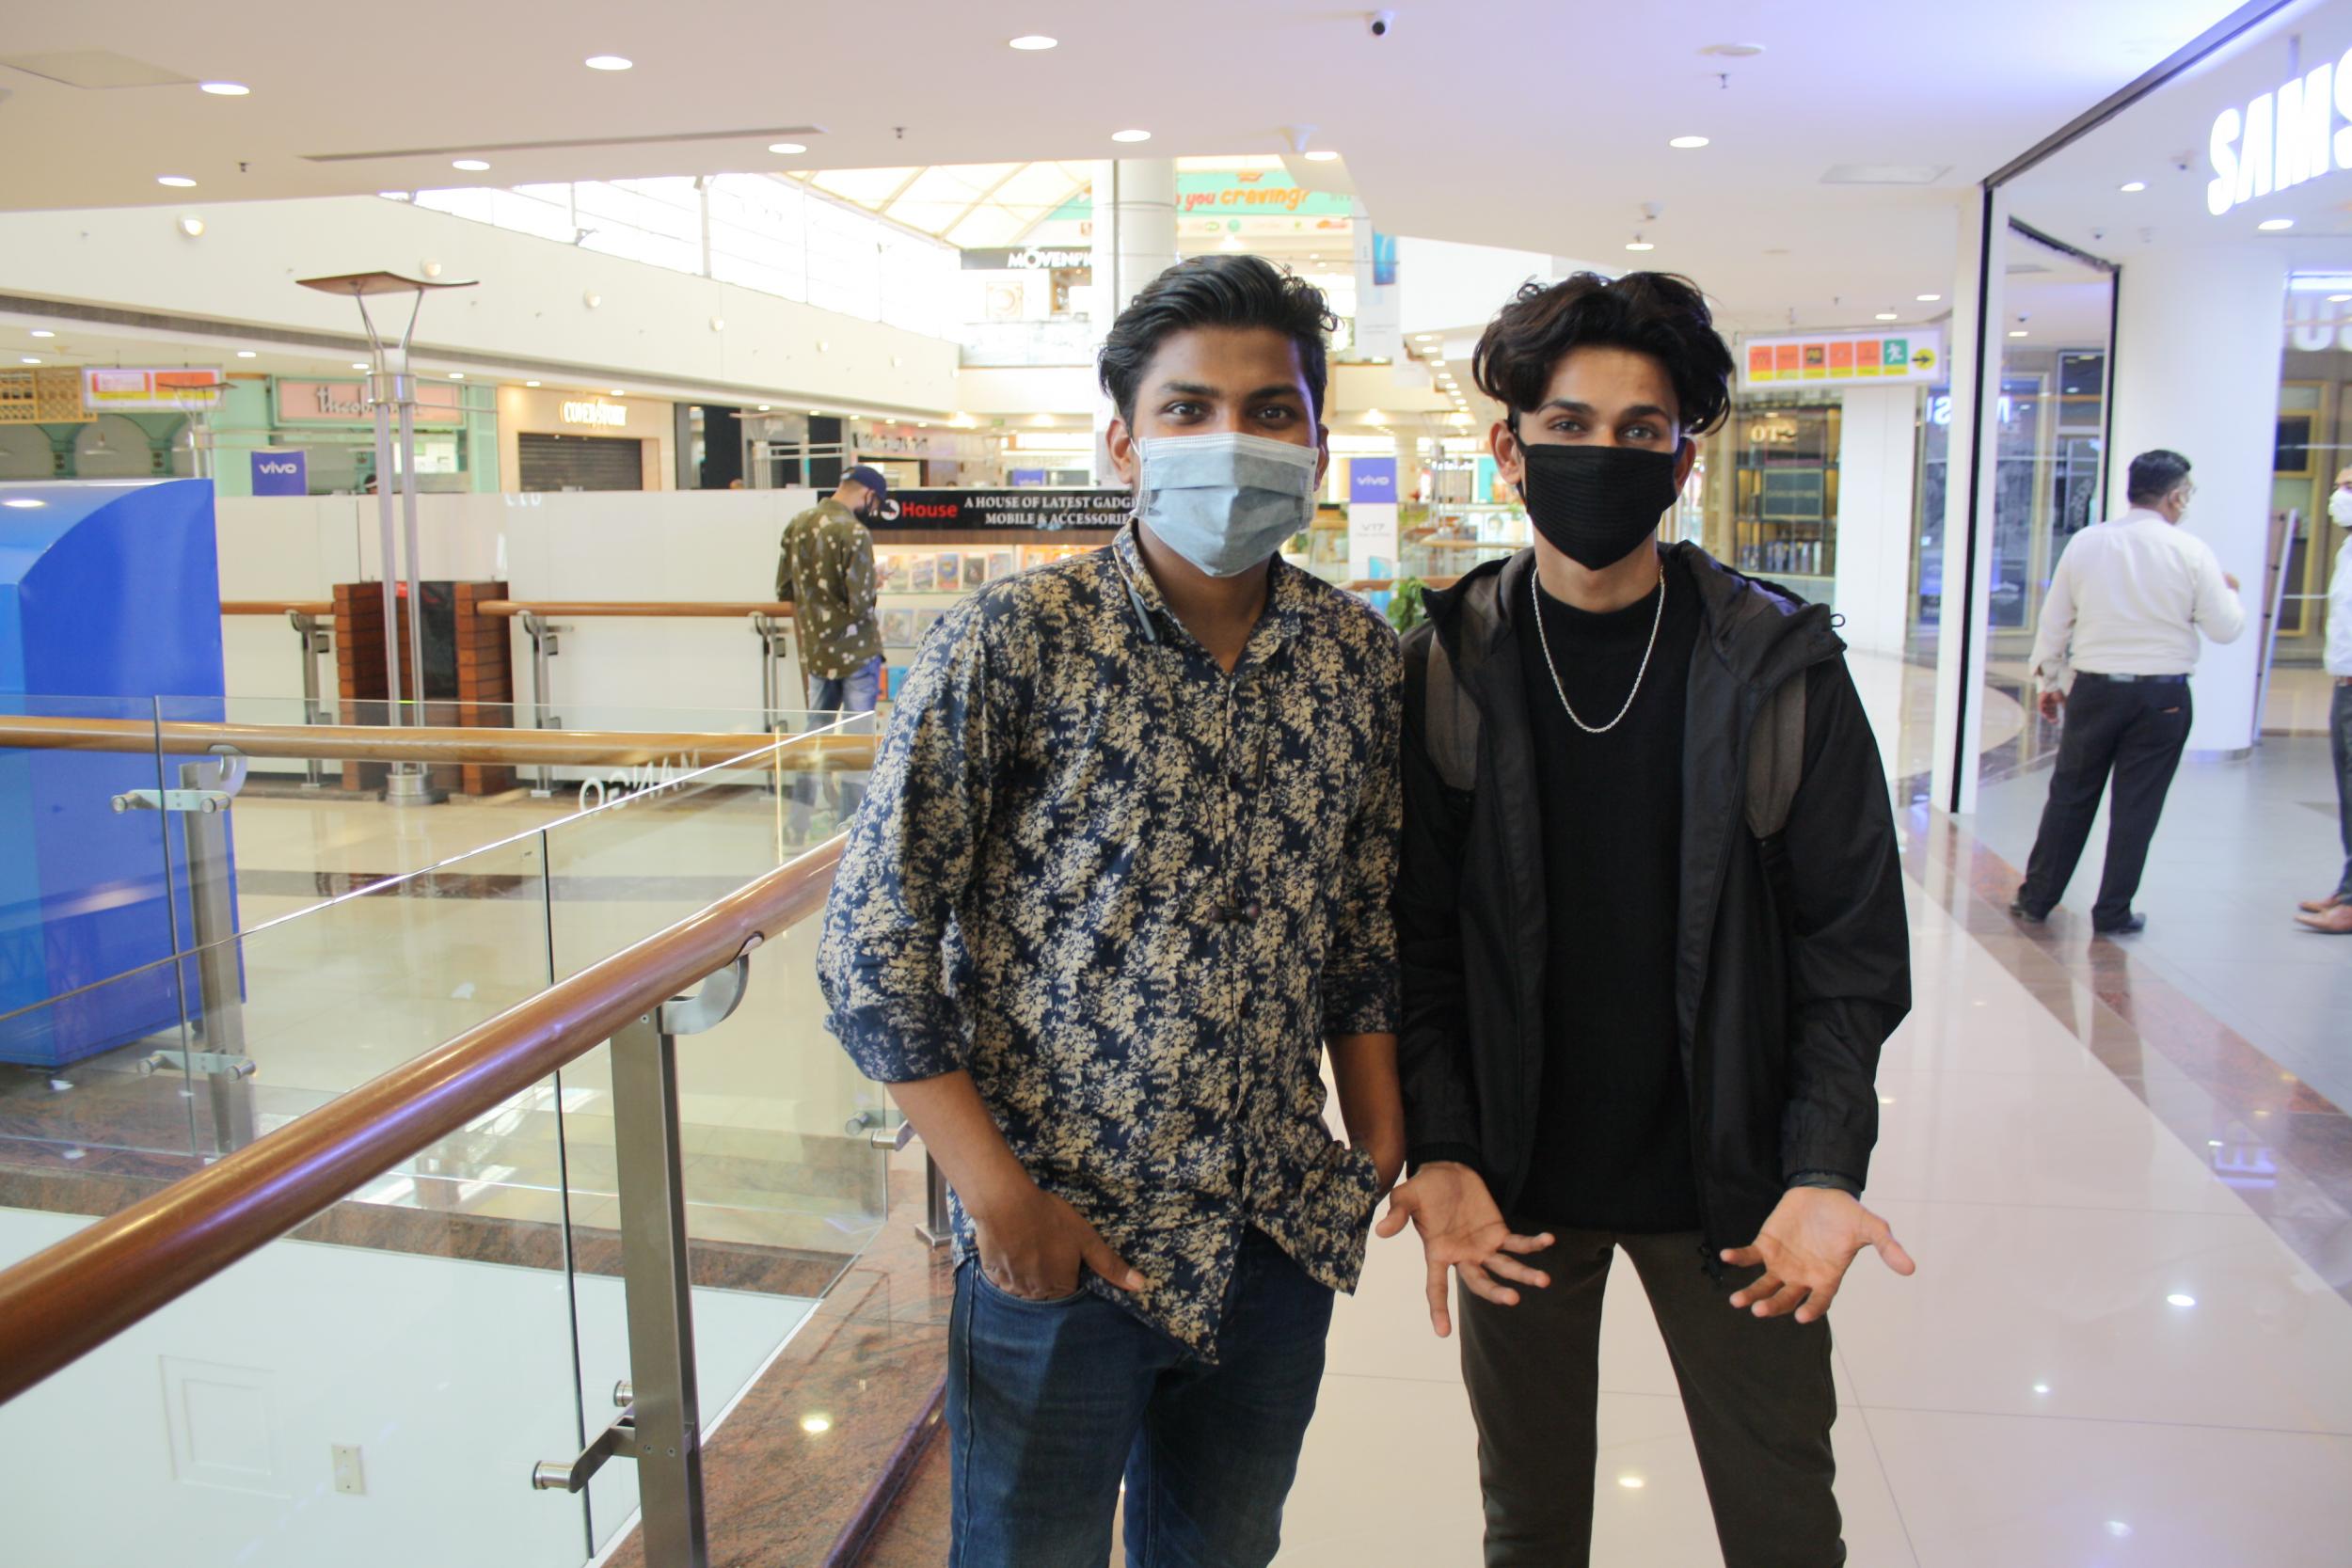 Pankaj (left) and Lucky said they only came to the mall to get a laptop repaired, and that they felt it was a ‘risky’ trip